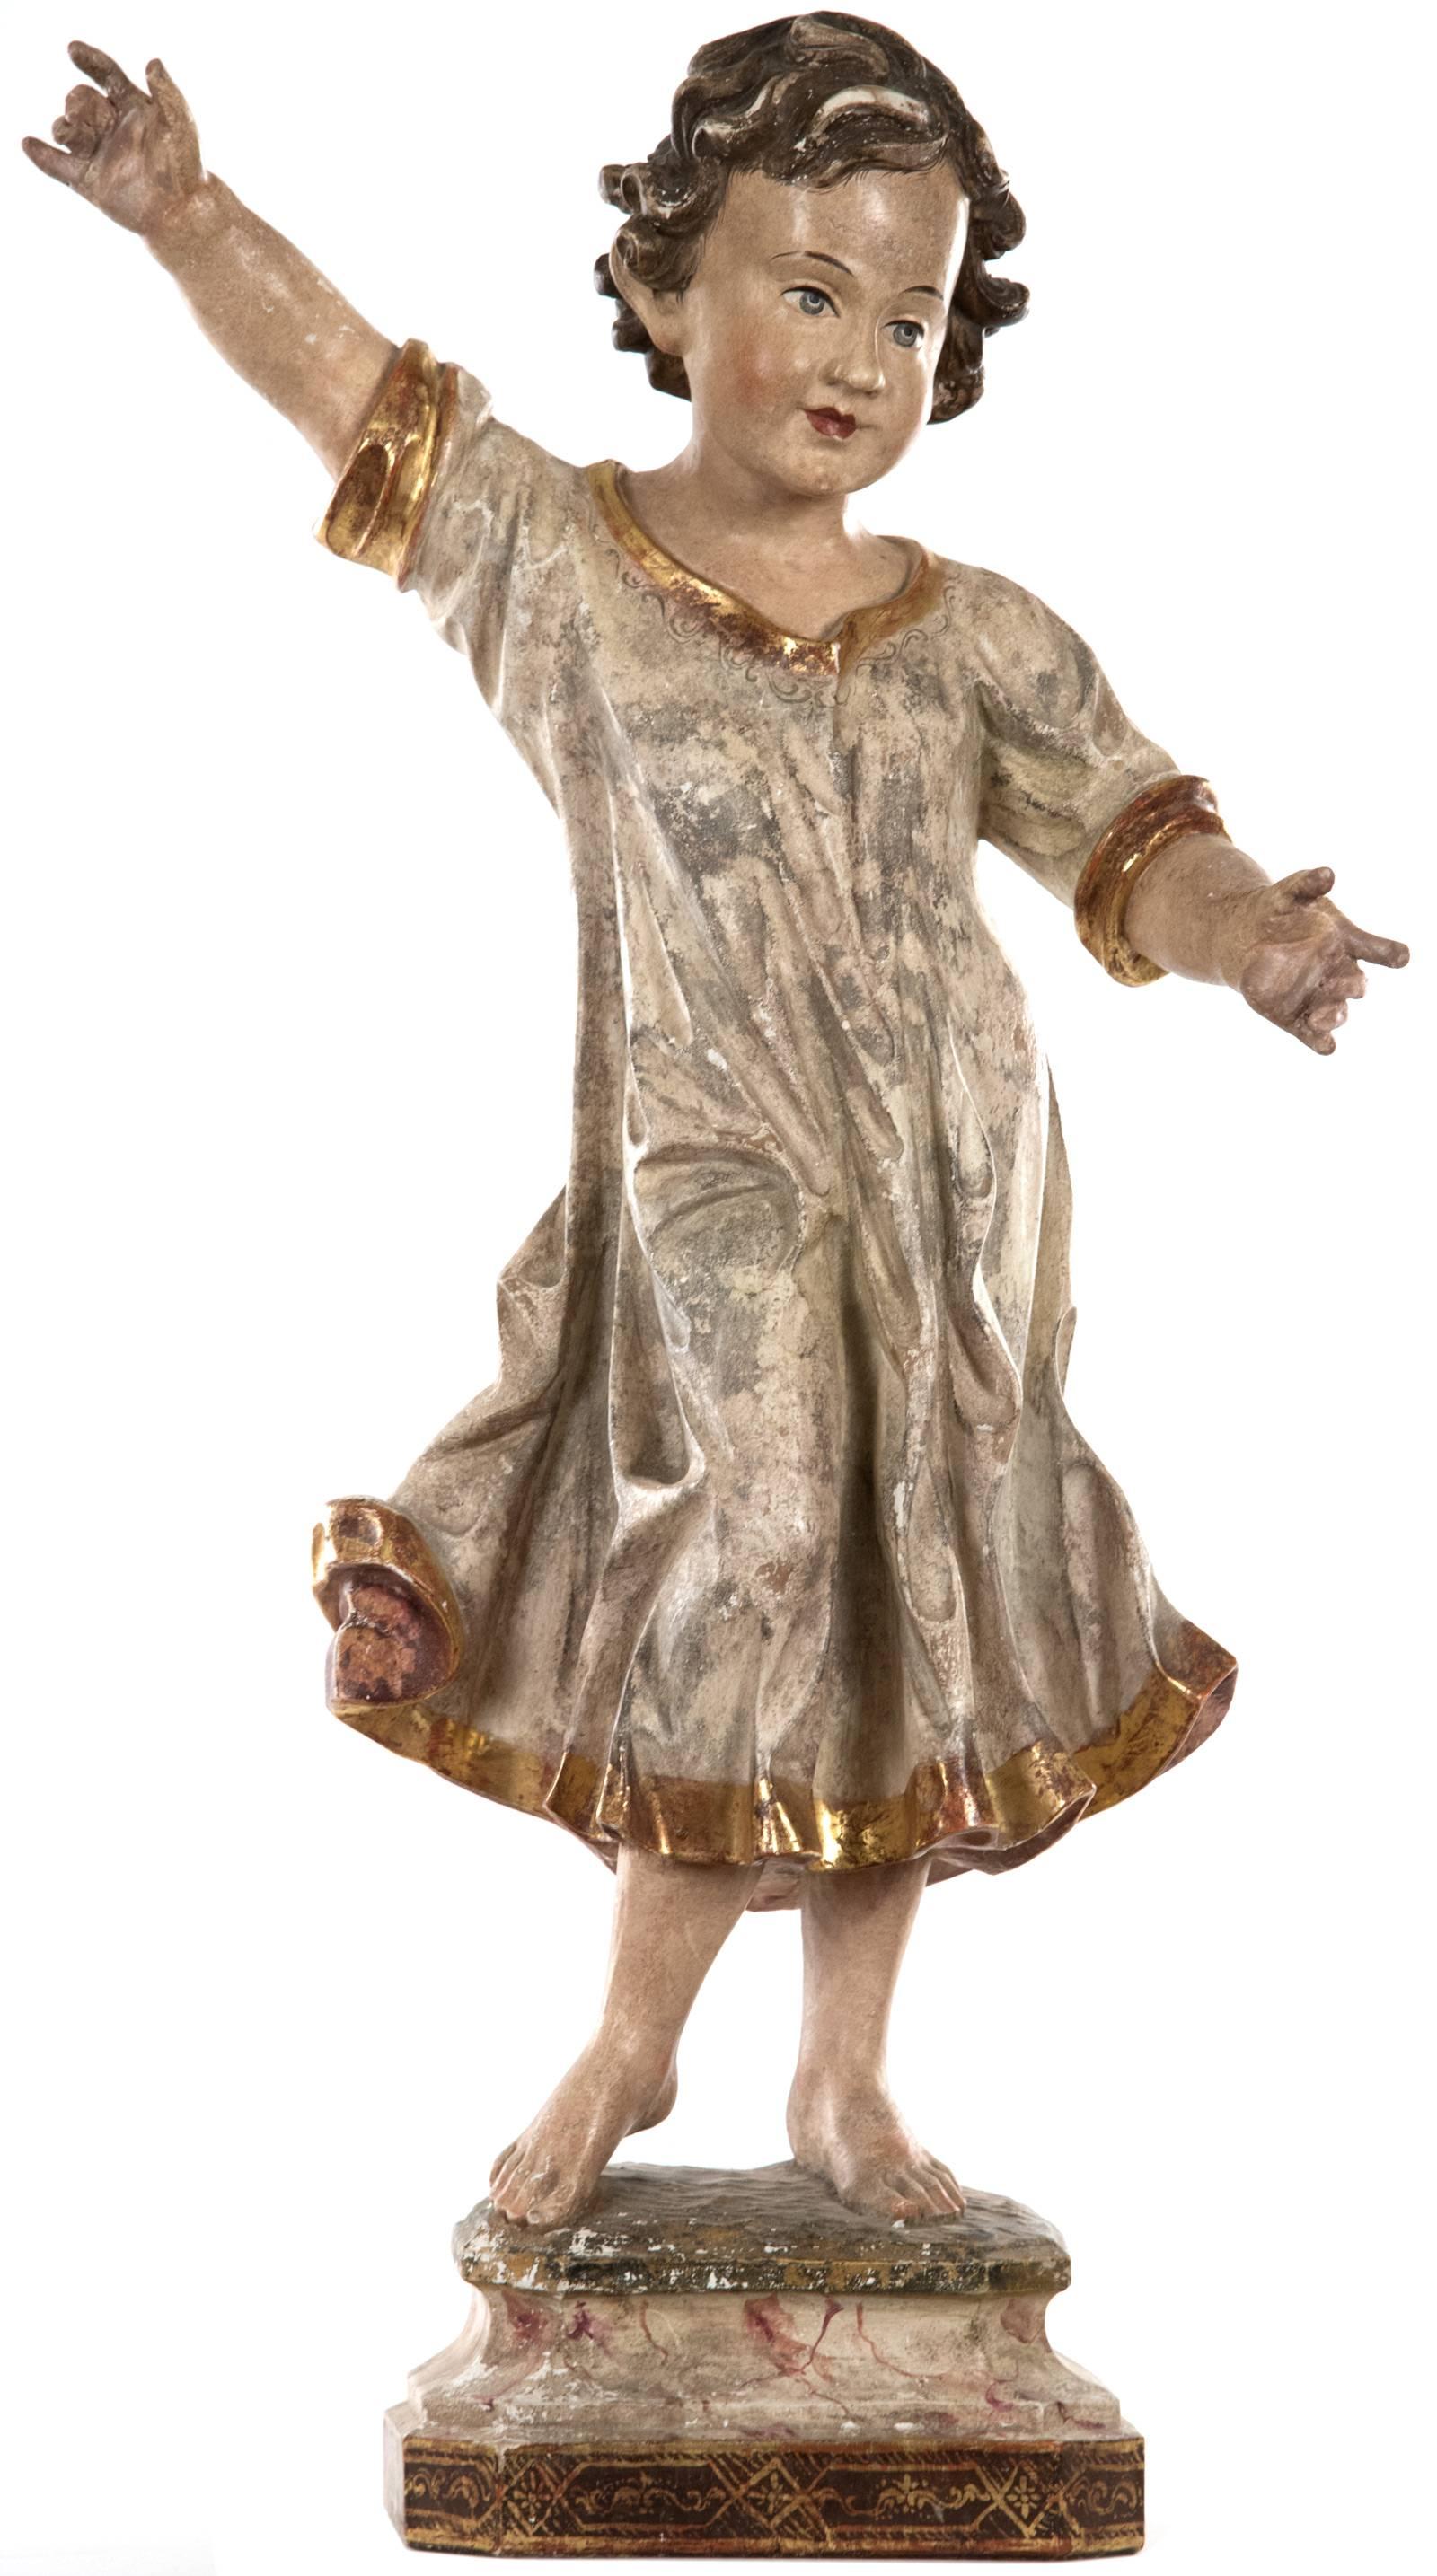 An ecclesiastical hand-carved and painted wooden figure of a young boy, his white and gold-trimmed robe flowing around his body with his arms stretched out as he is captured in mid-dance - a young boy full of energy and movement. The figure is